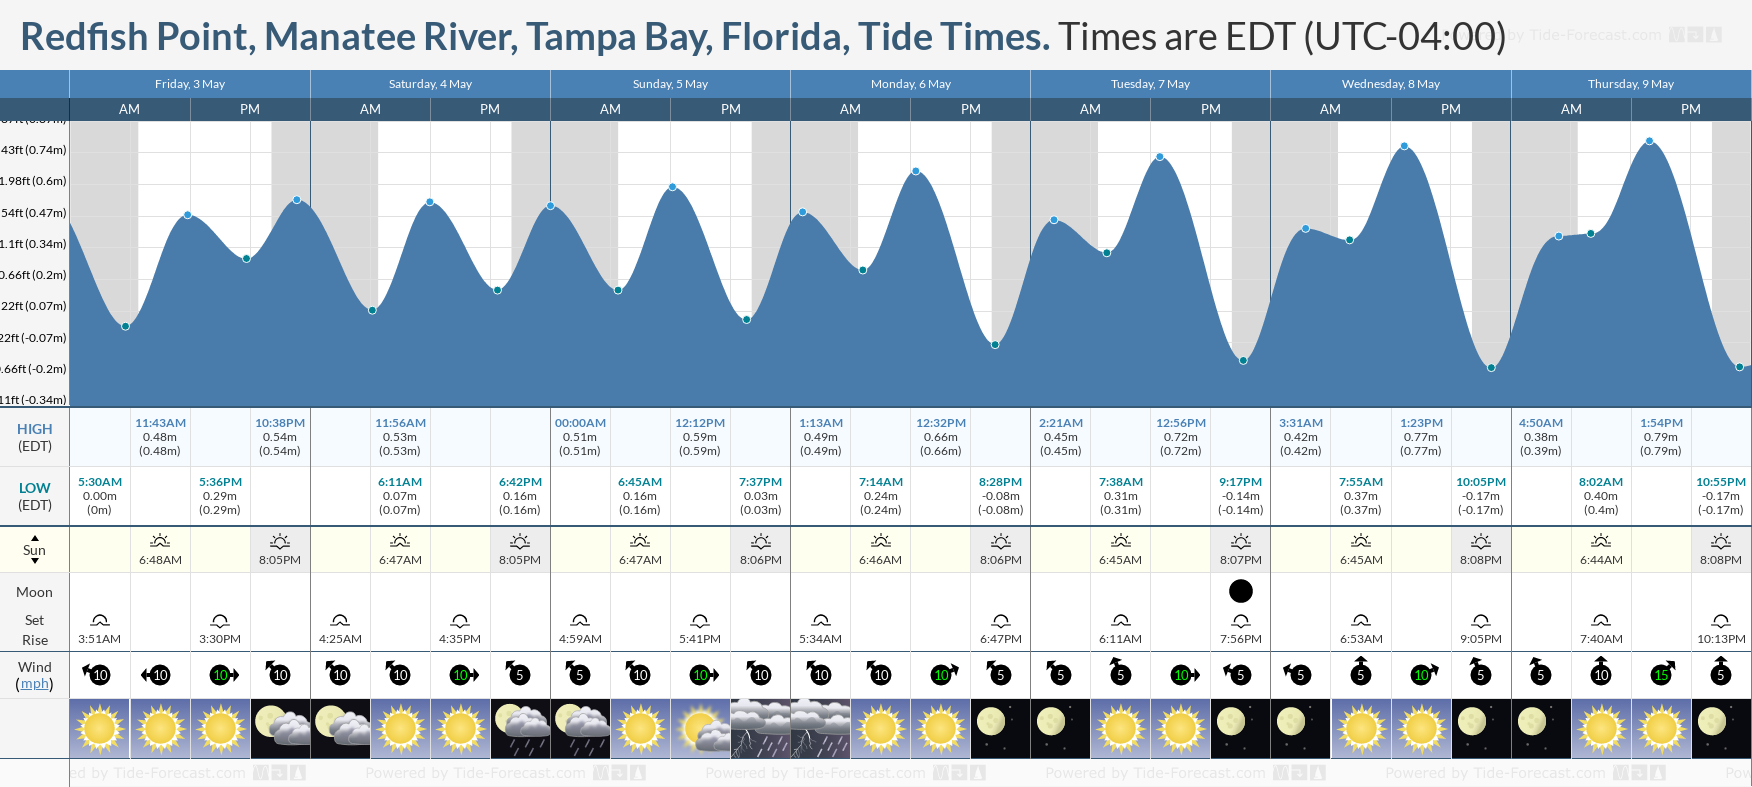 Redfish Point, Manatee River, Tampa Bay, Florida Tide Chart including high and low tide tide times for the next 7 days